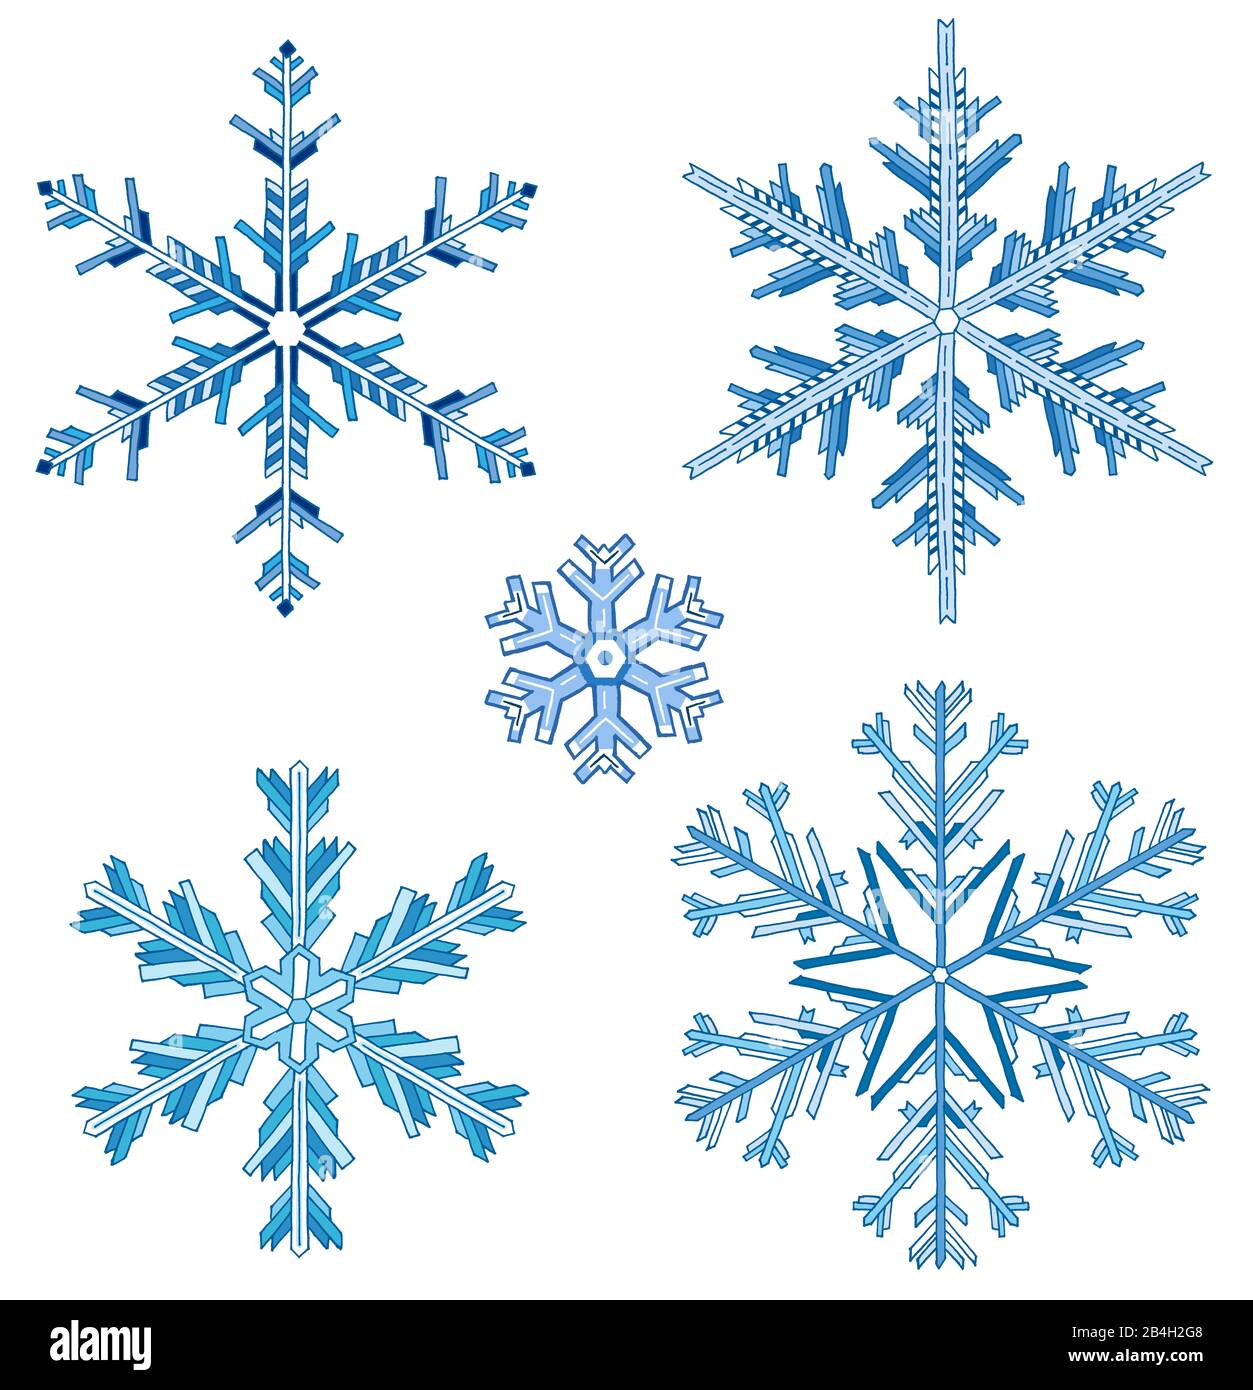 Drawn snowflakes in blue tones against isolated, white background Stock Photo